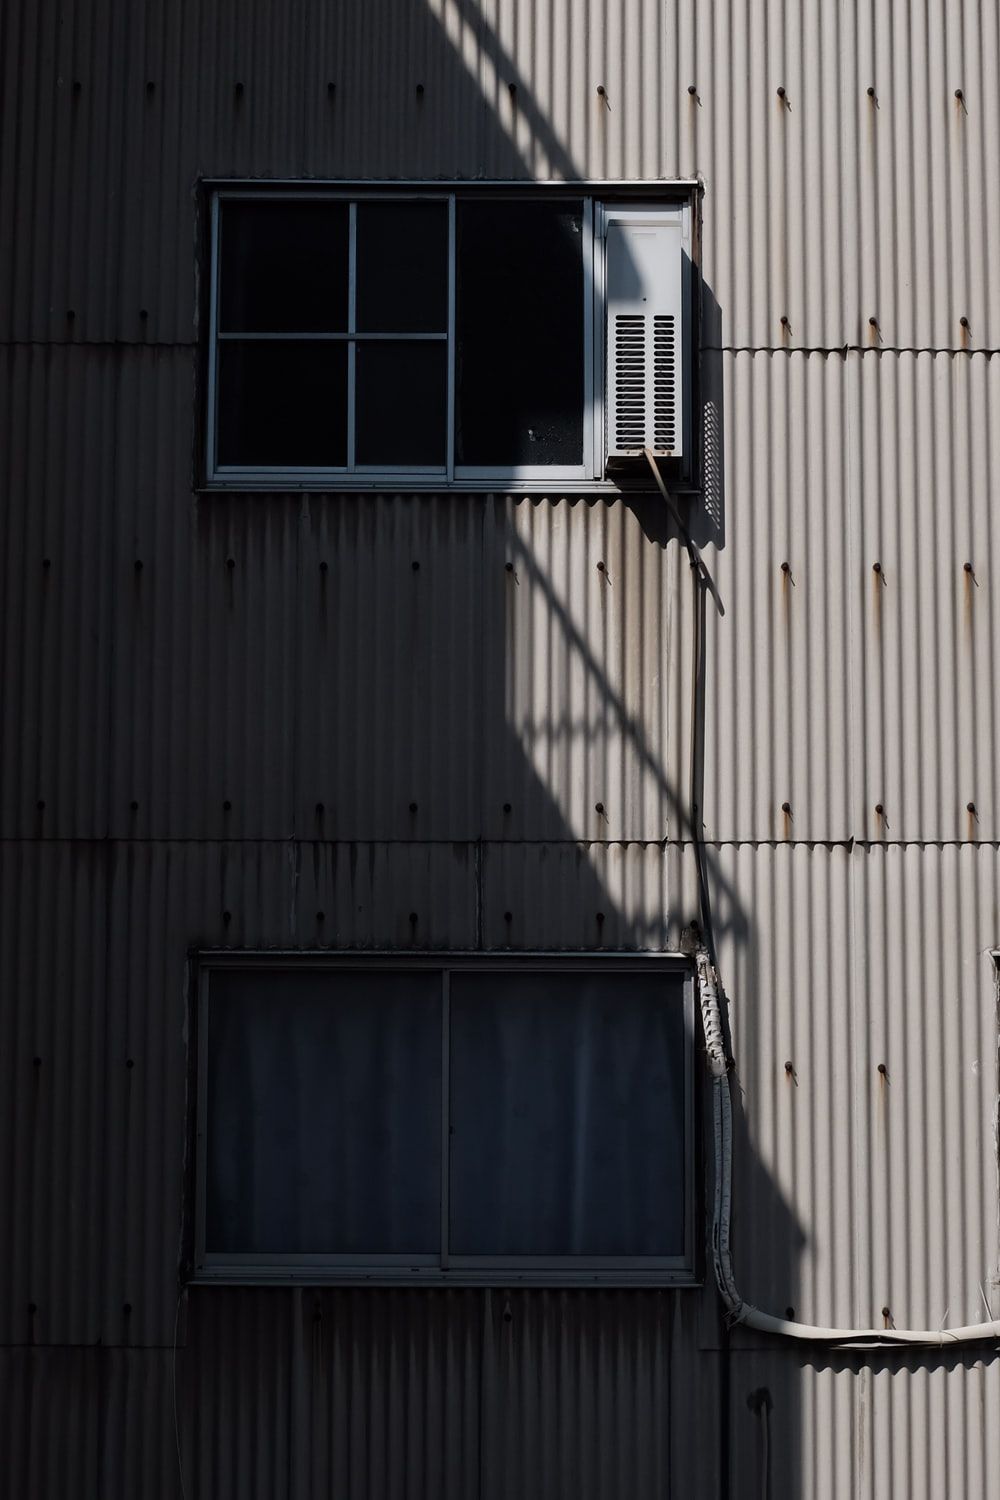 Air Conditioners Picture. Download Free Image